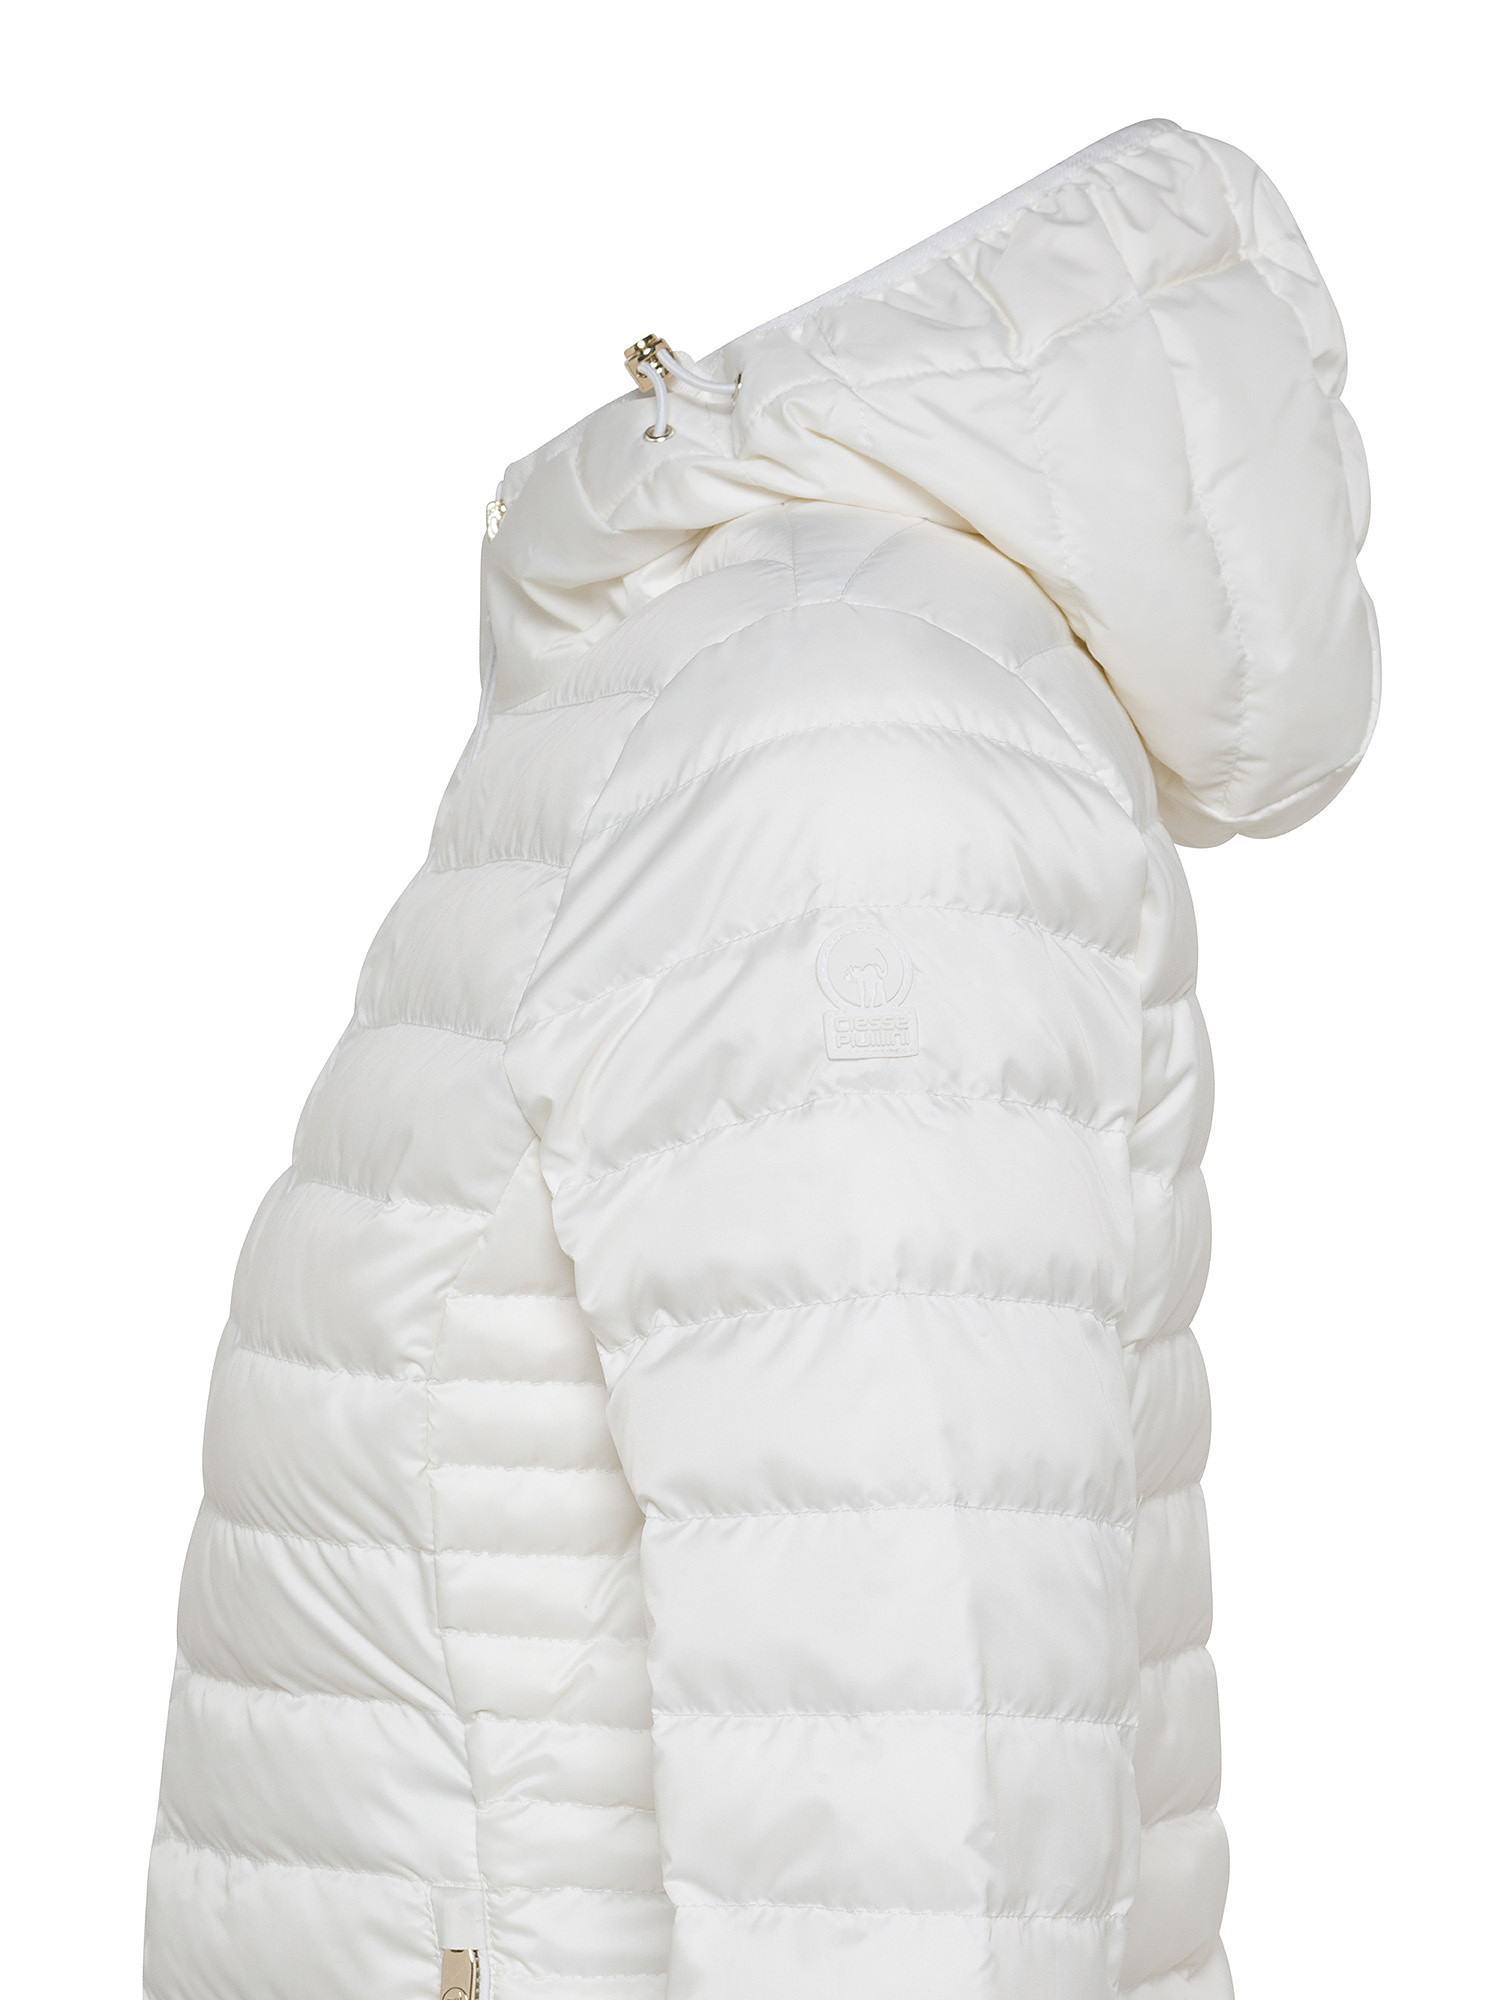 Ciesse Piumini - Carrie down jacket with hood, White, large image number 2